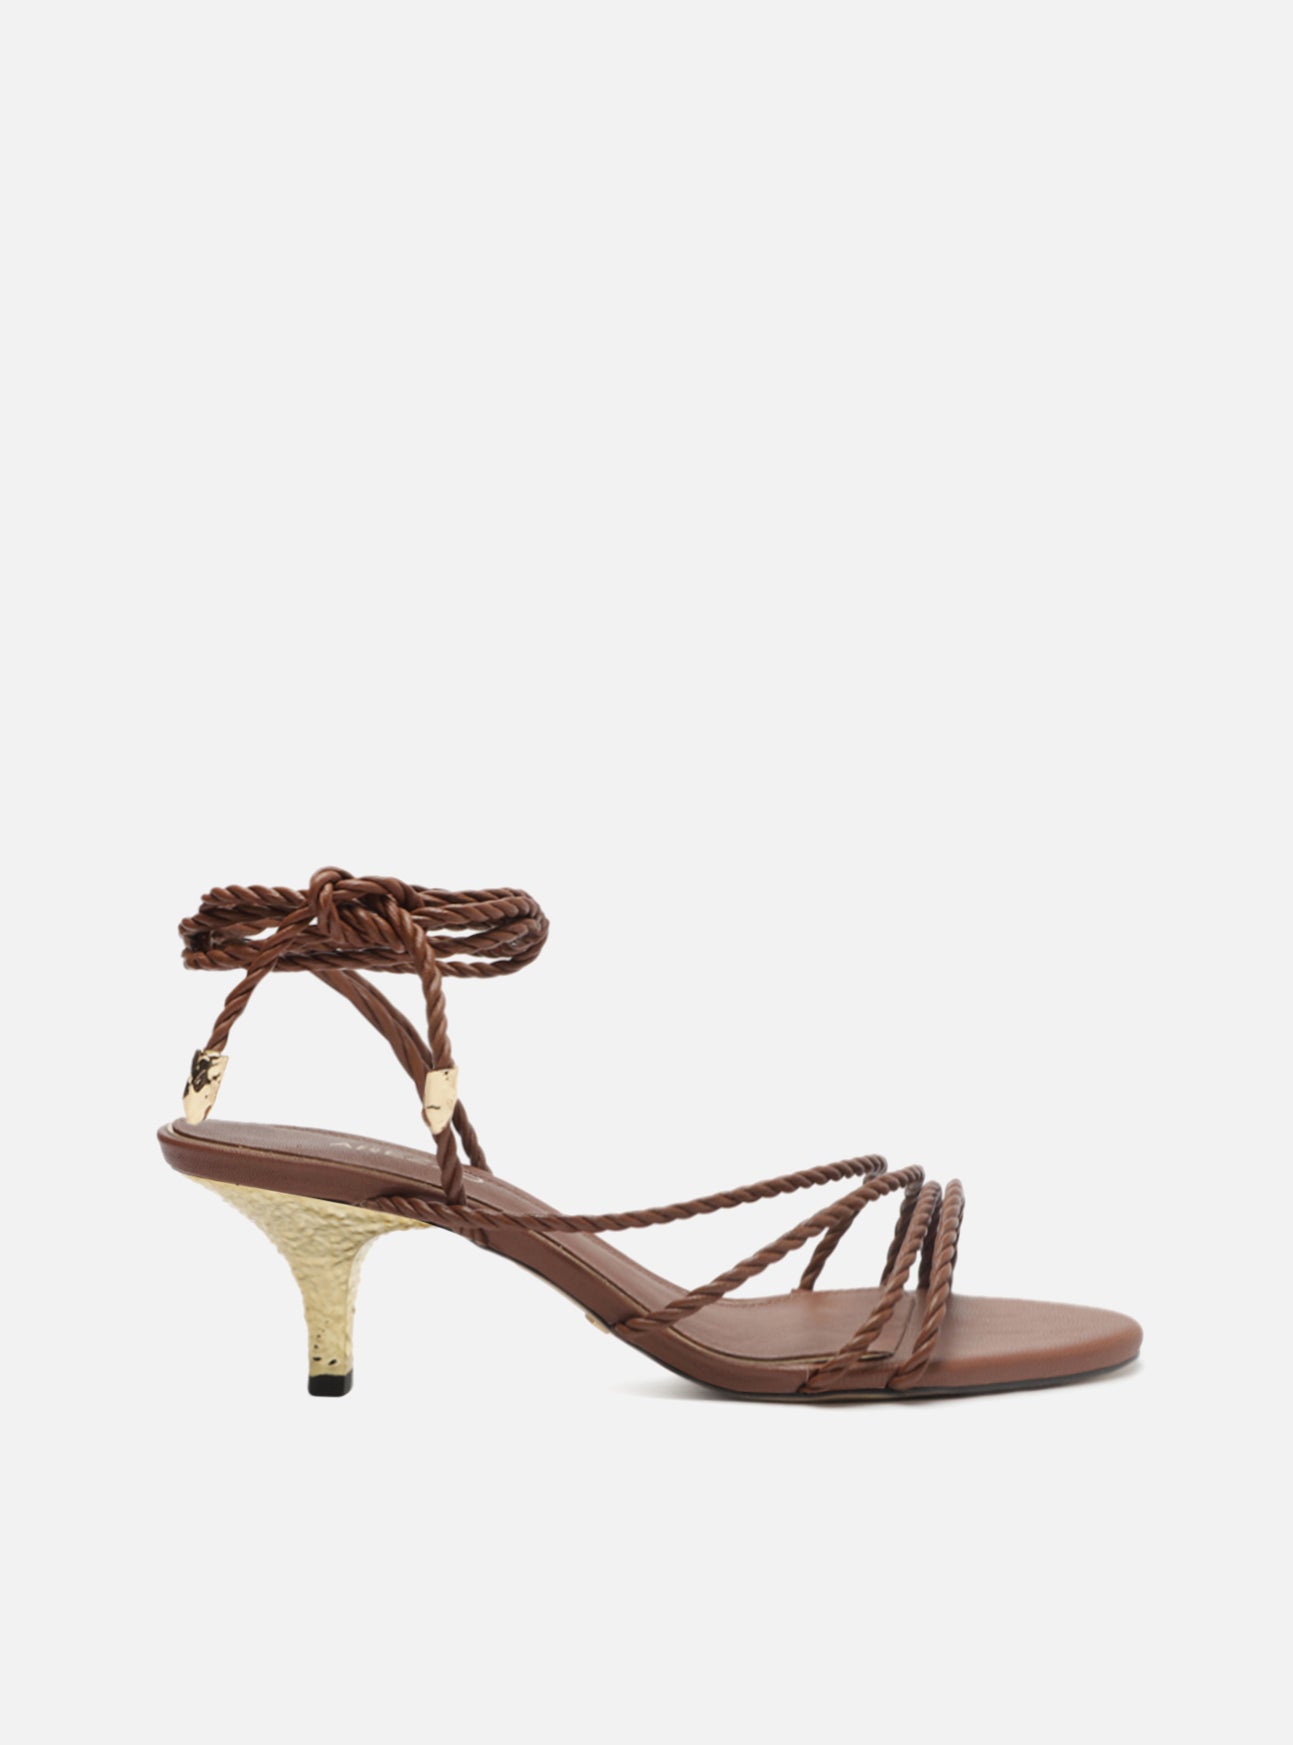 Brown leather sandal, with twisted straps, low stiletto heel in hammered gold metal and round toe. Closure with metal tip.